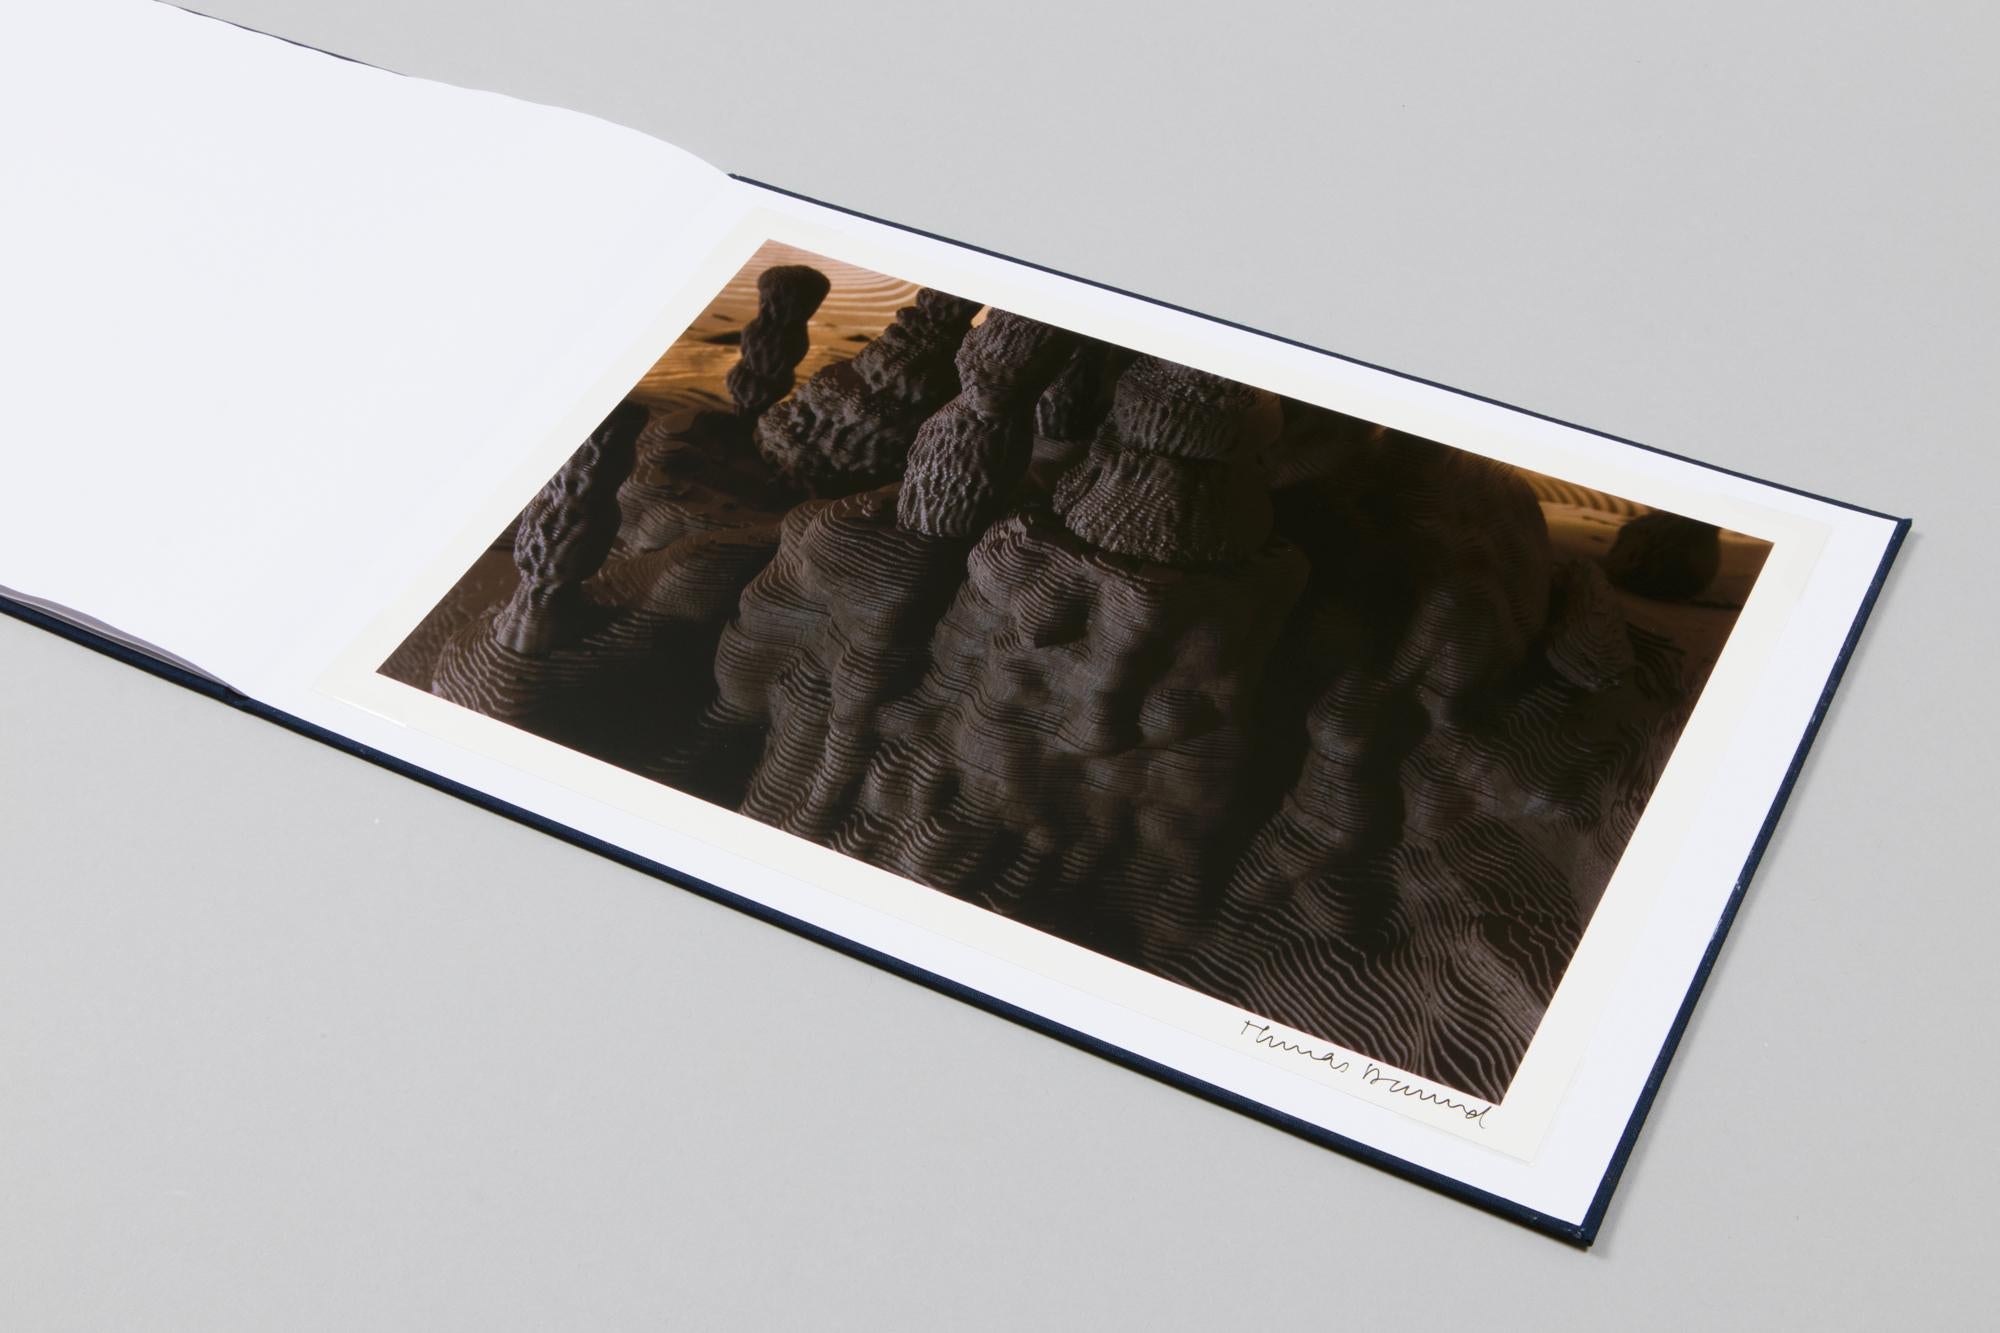 Thomas Demand, Grotto (from Catalogue Serpentine Gallery): 2 Photographs, Signed 2